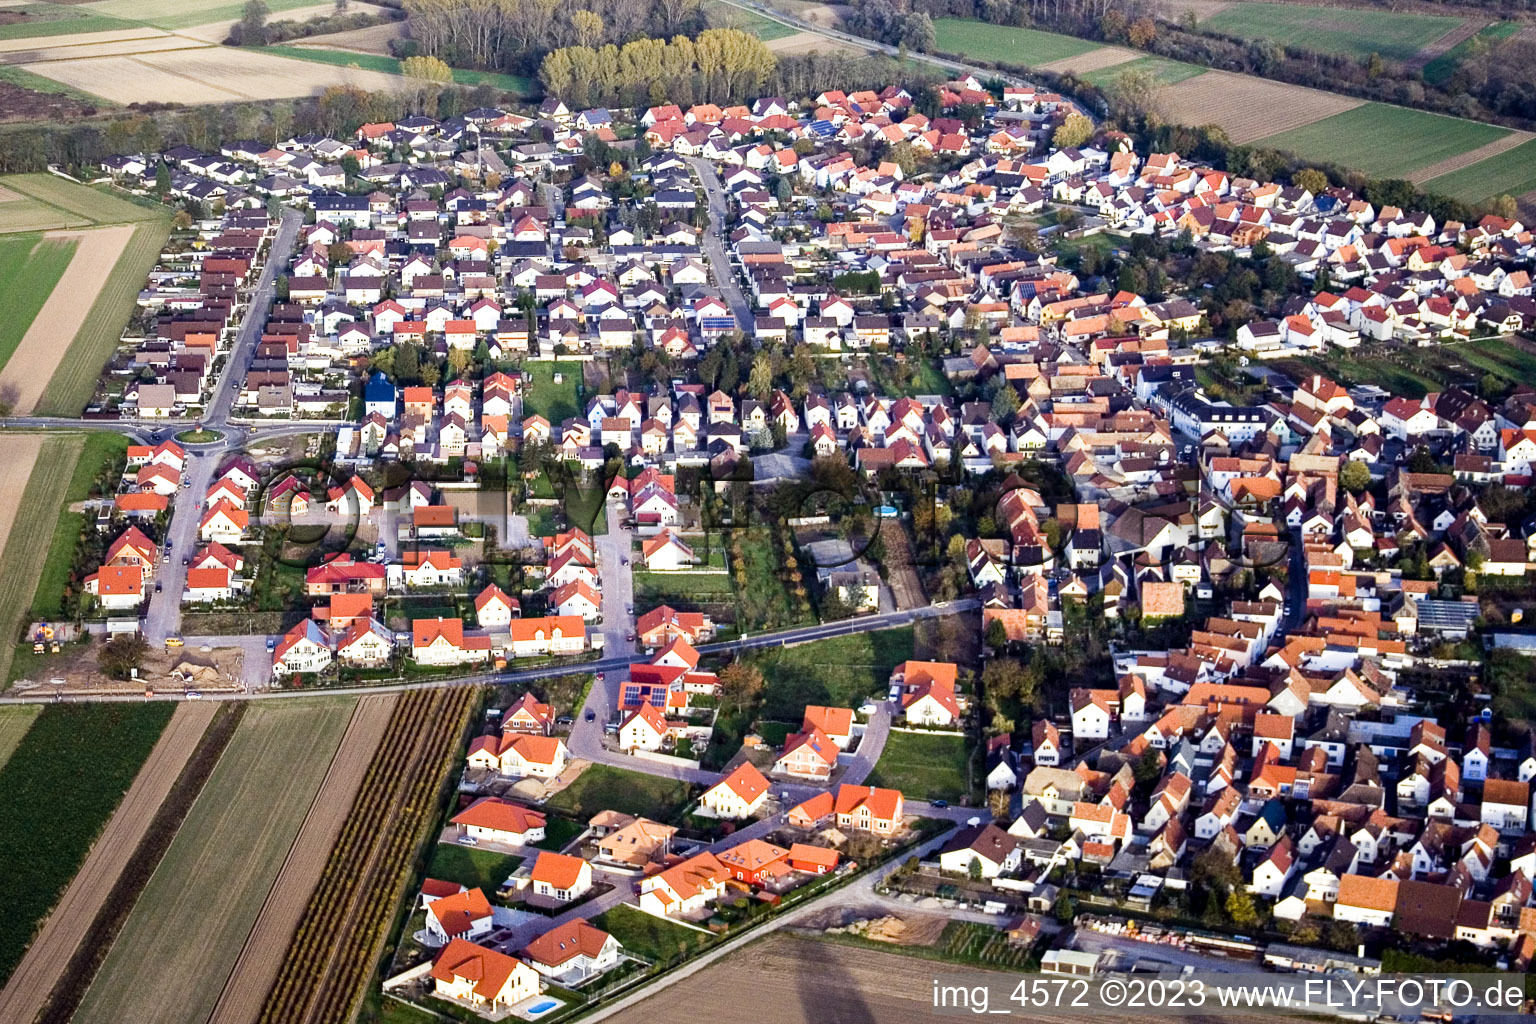 Aerial view of From the south in Hördt in the state Rhineland-Palatinate, Germany